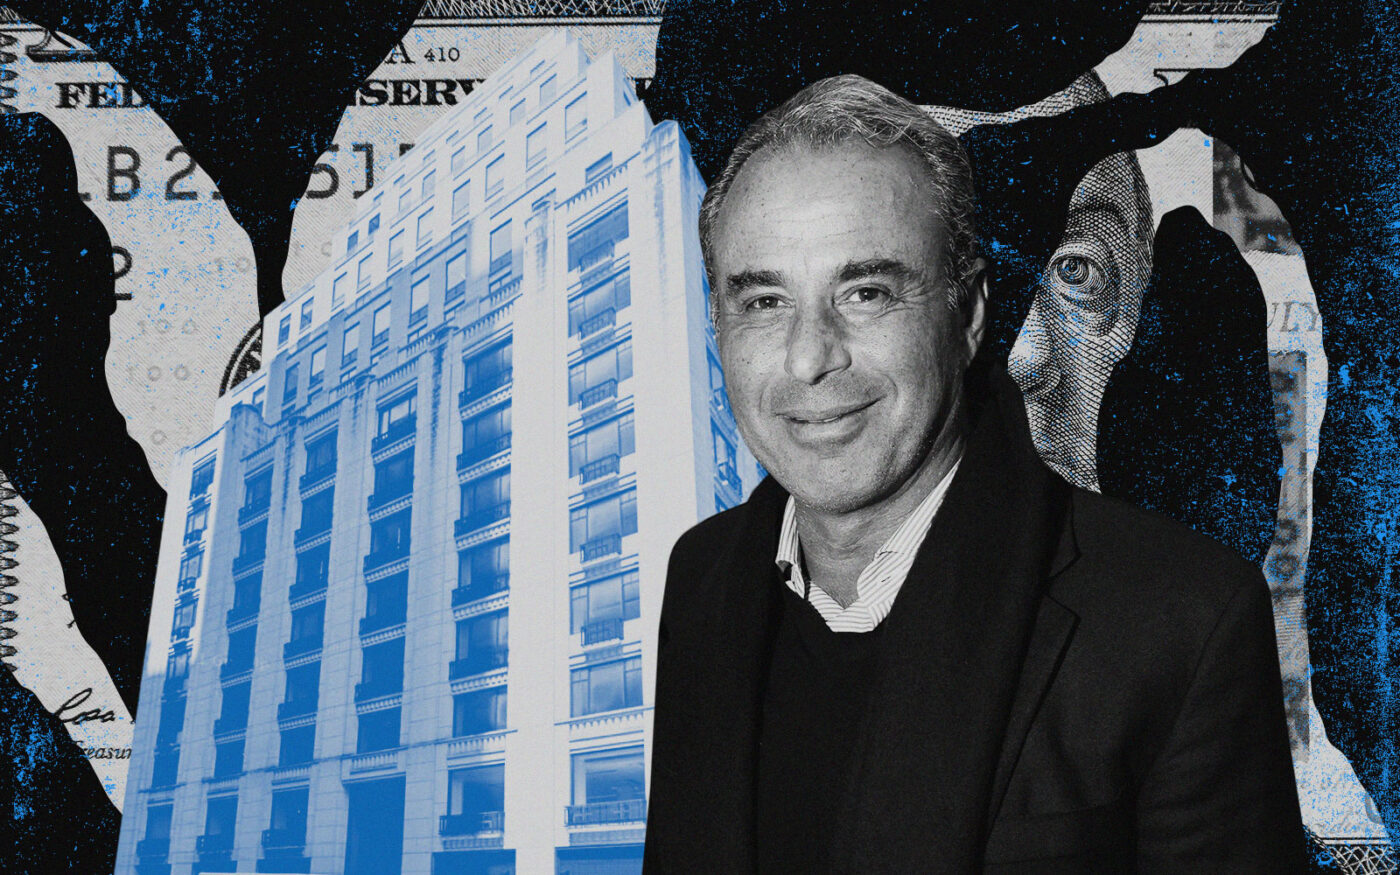 Ben Ashkenazy’s 660 Madison Ave Remains Vacant. Why?